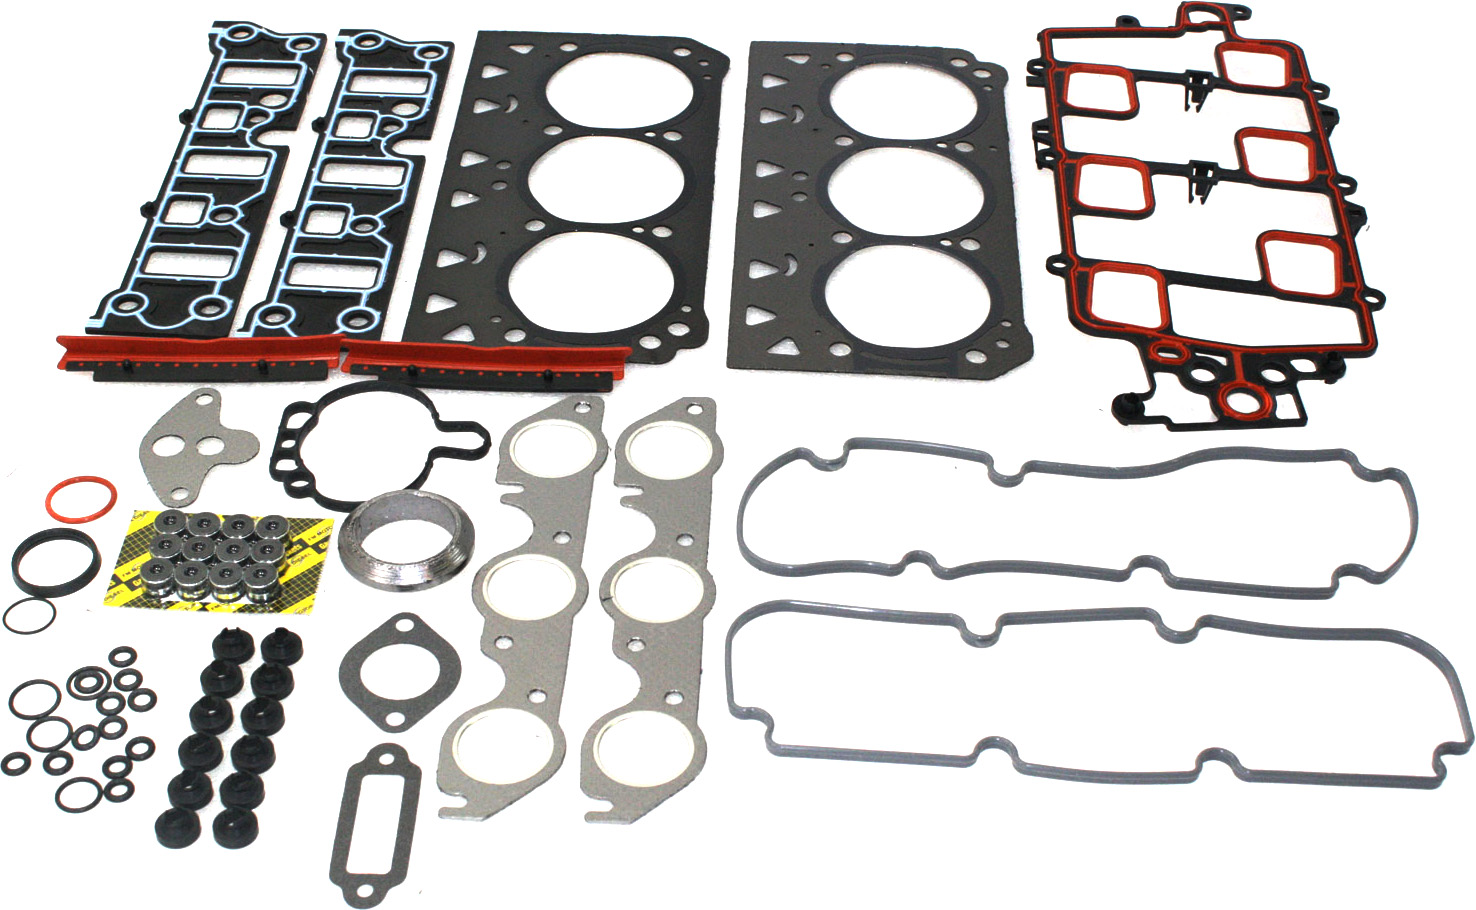 Head Gasket Set Compatible with 1997-2005 Buick LeSabre 1998-2005 Chevrolet  Monte Carlo 6Cyl 3.8L